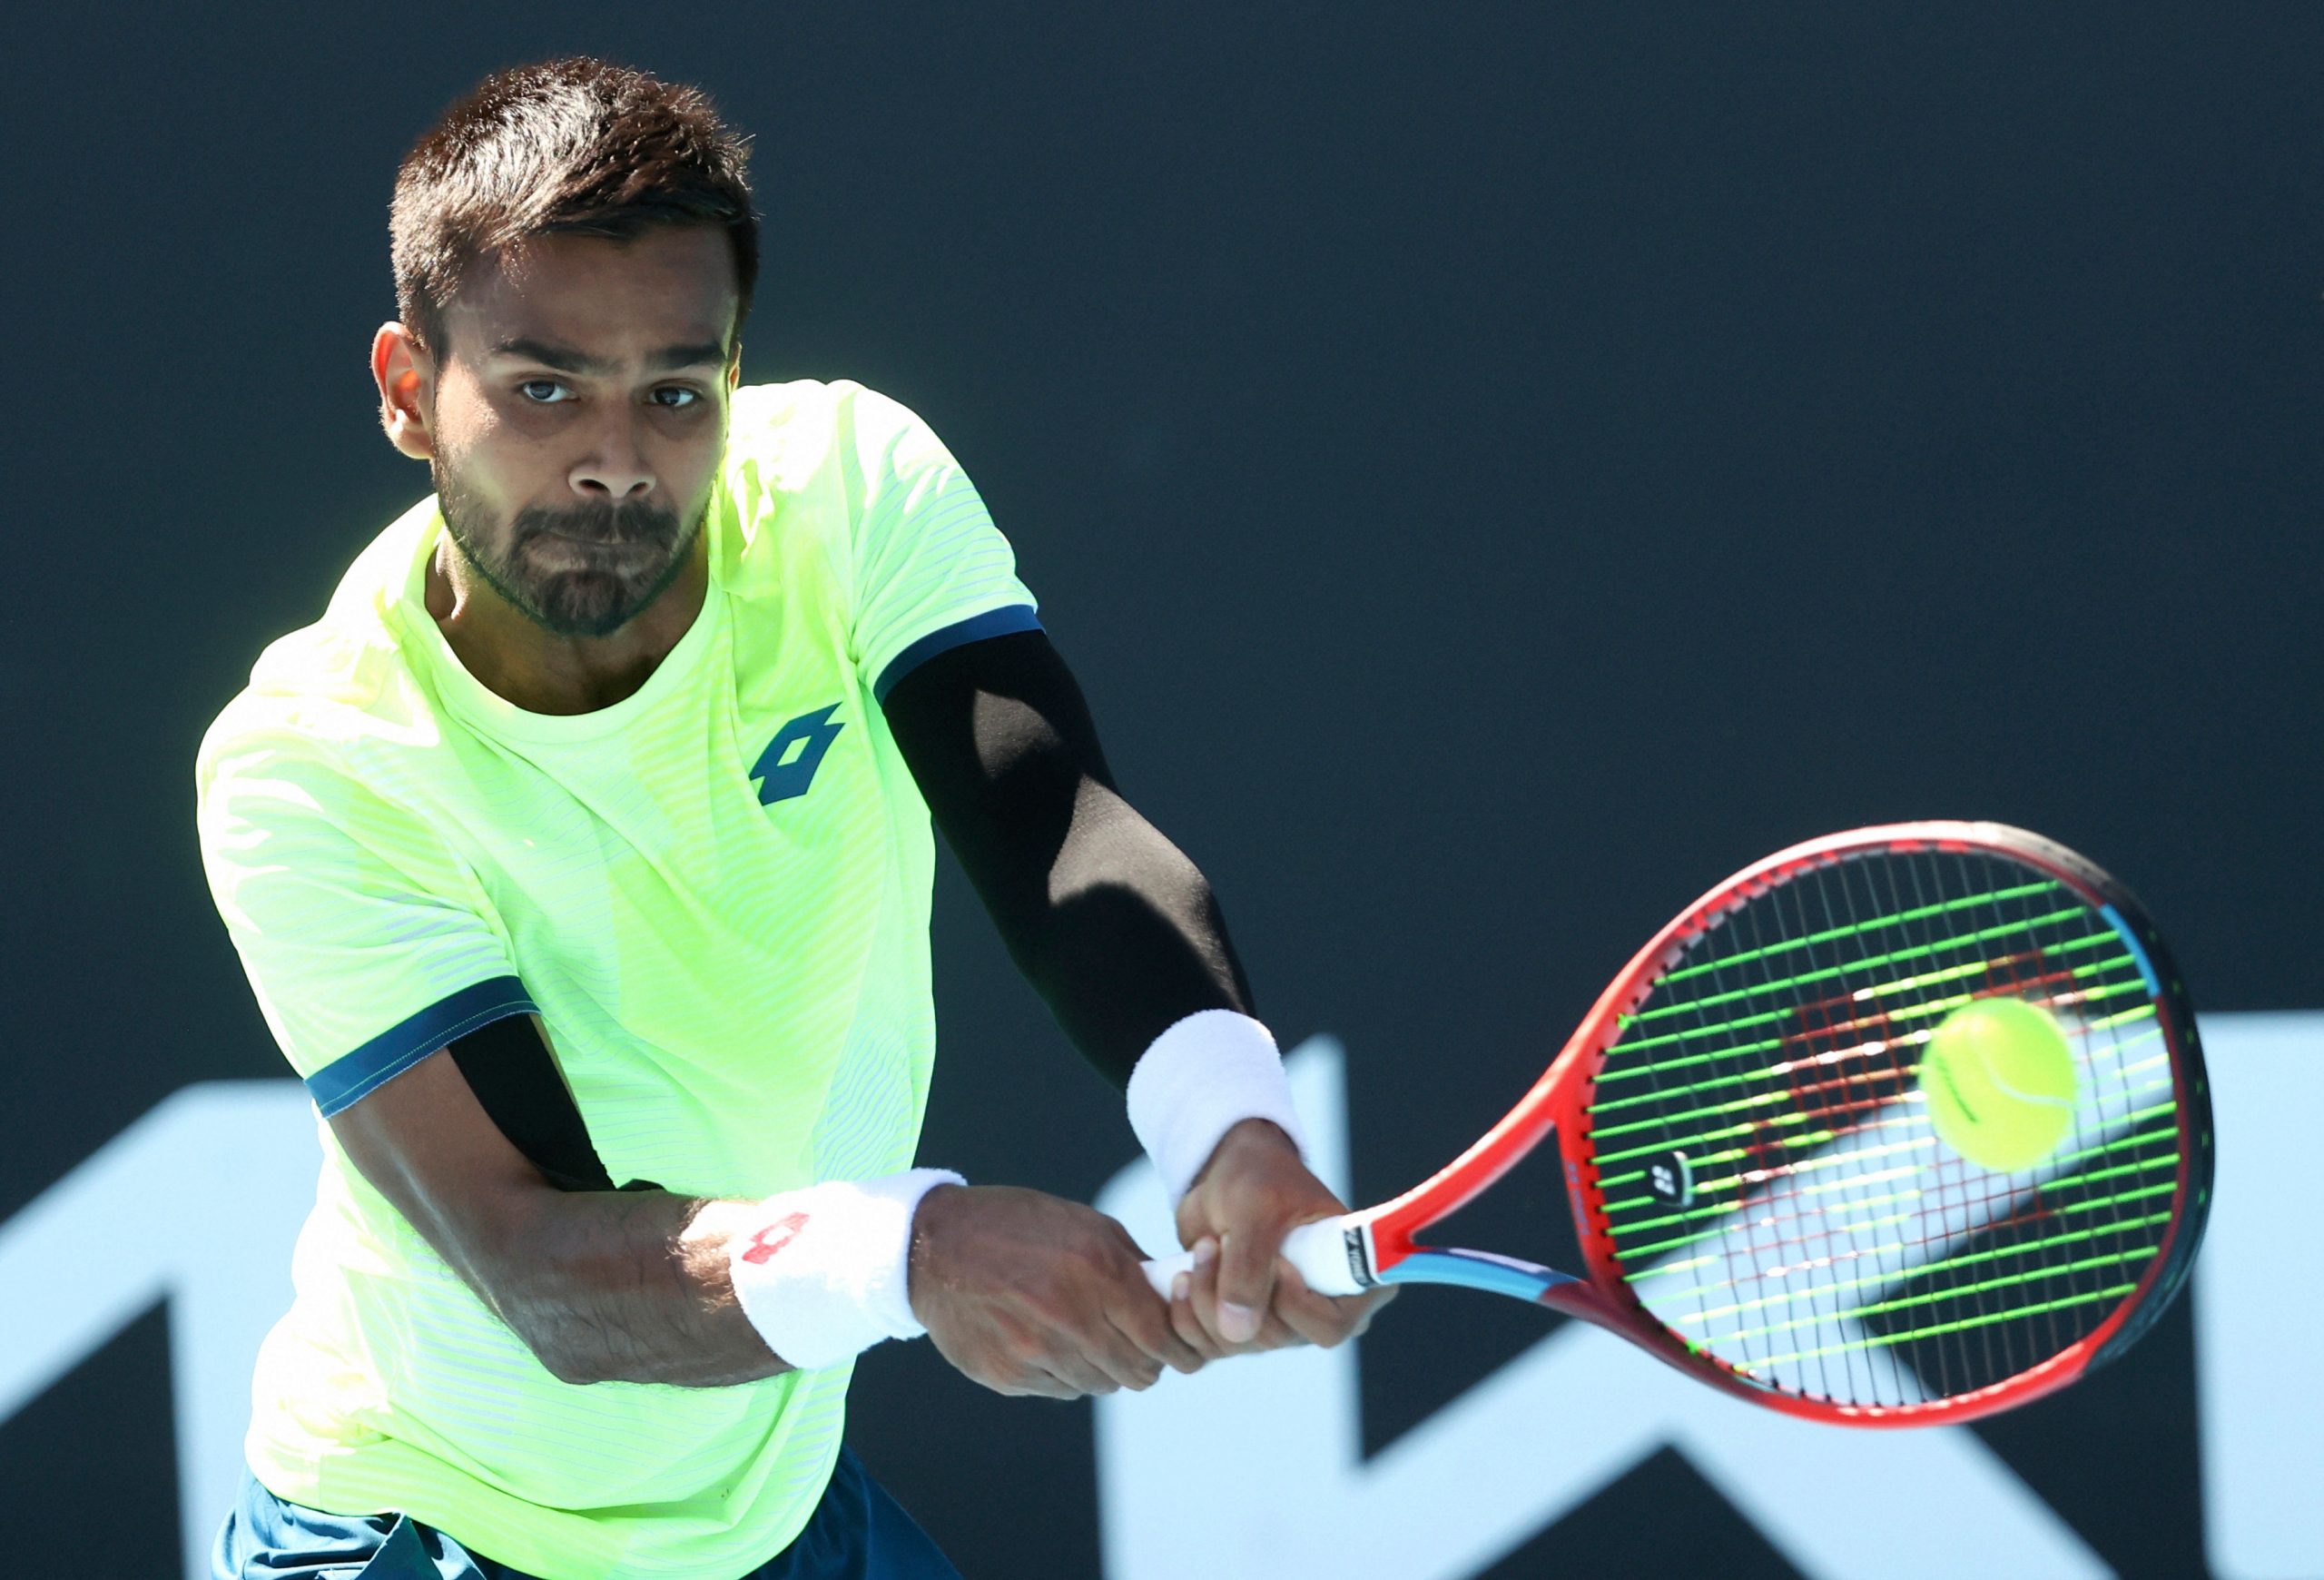 Sumit Nagal becomes third Indian to win tennis singles match at Olympics